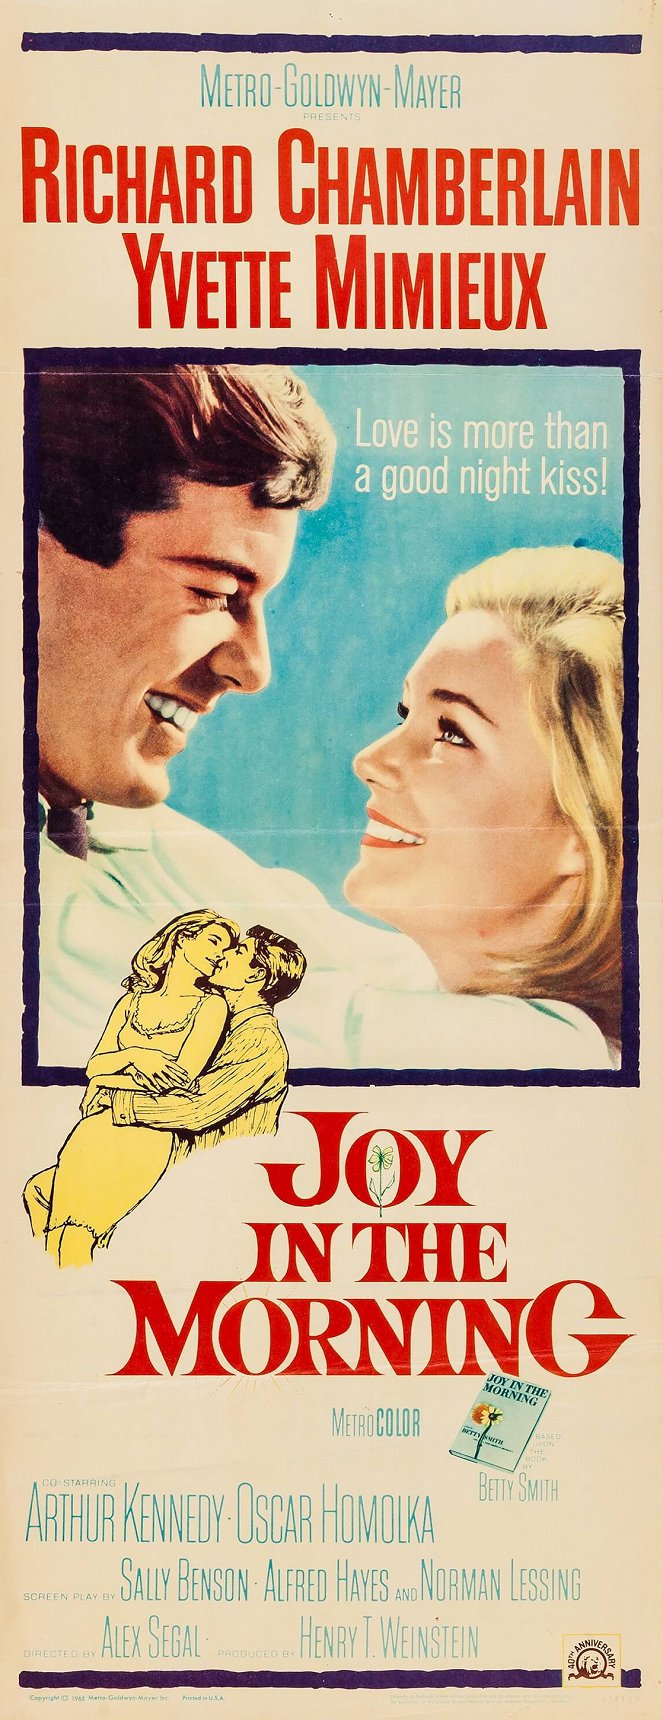 Joy in the Morning - Posters